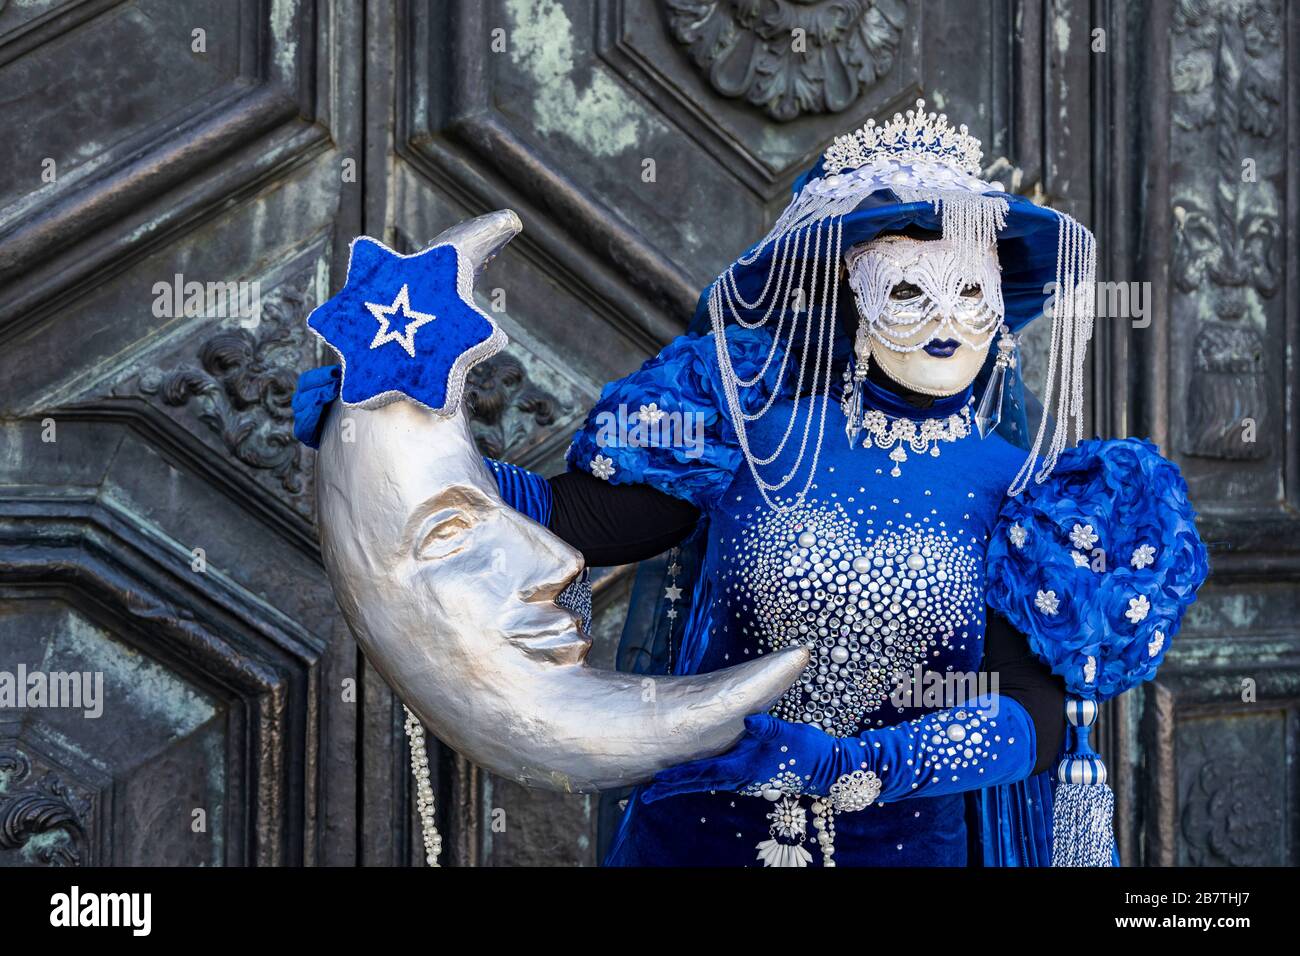 Woman wearing a mask holding a large crescent shaped moon during the  Carnival in Venice, Venice, Veneto, Italy, Europe Stock Photo - Alamy